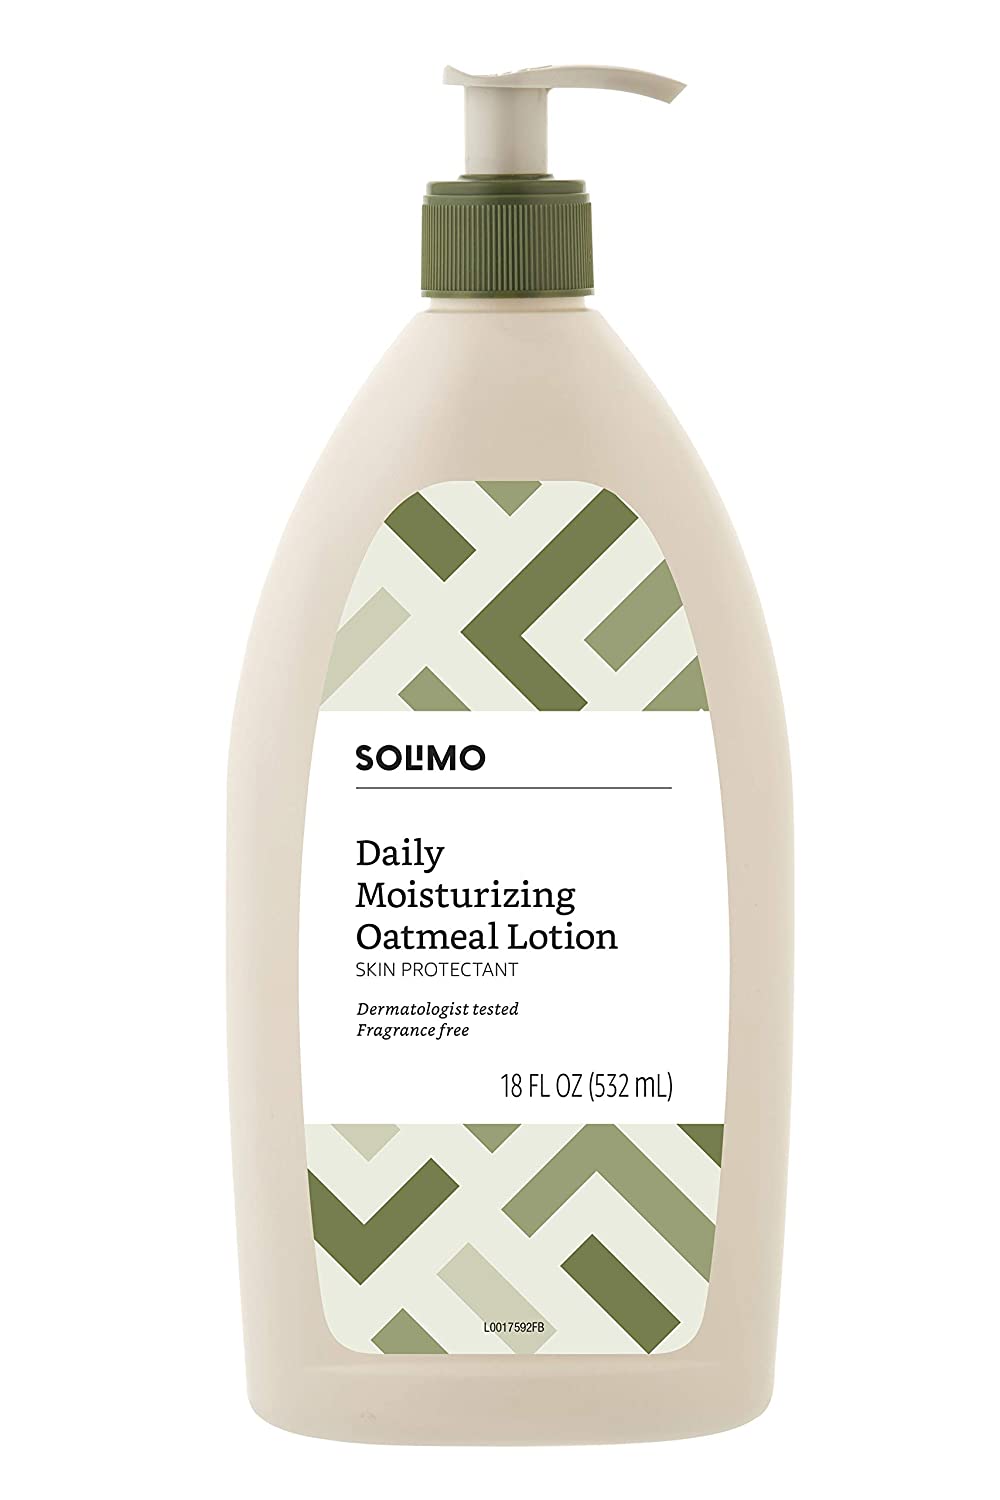 Solimo Hypoallergenic Oatmeal Lotion Fragrance-Free Moisturizer